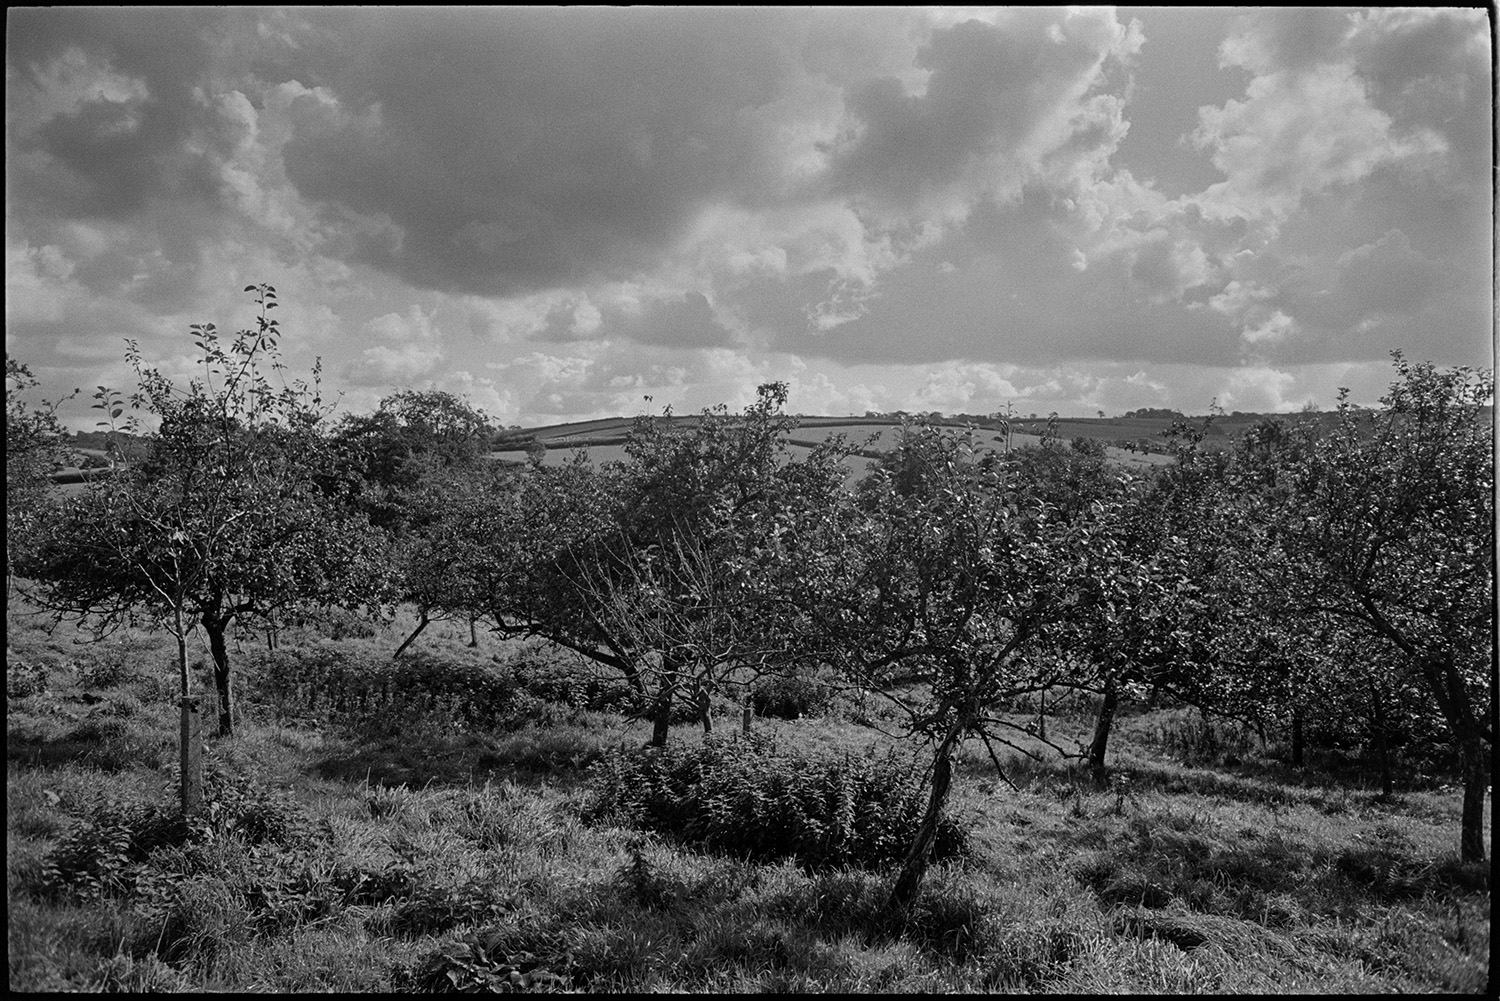 Orchard, Devon farm orchard. 
[Apple trees in an orchard at Spittle Farm, Chulmleigh. Clouds are visible in the sky above.]